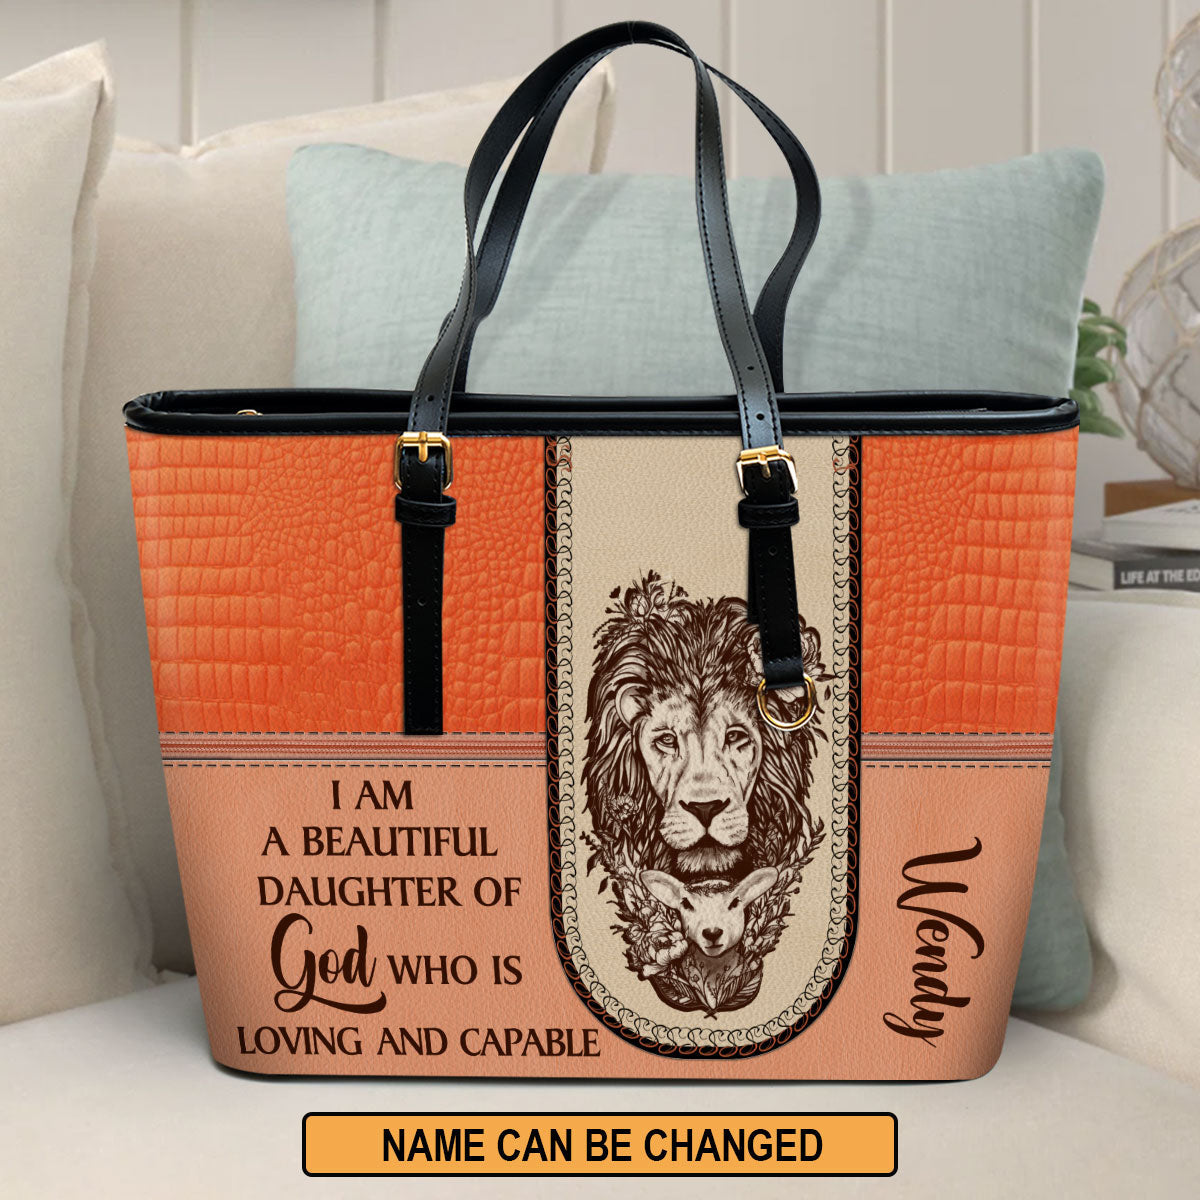 I Am A Daughter Of God Personalized Large Leather Tote Bag - Christian Inspirational Gifts For Women